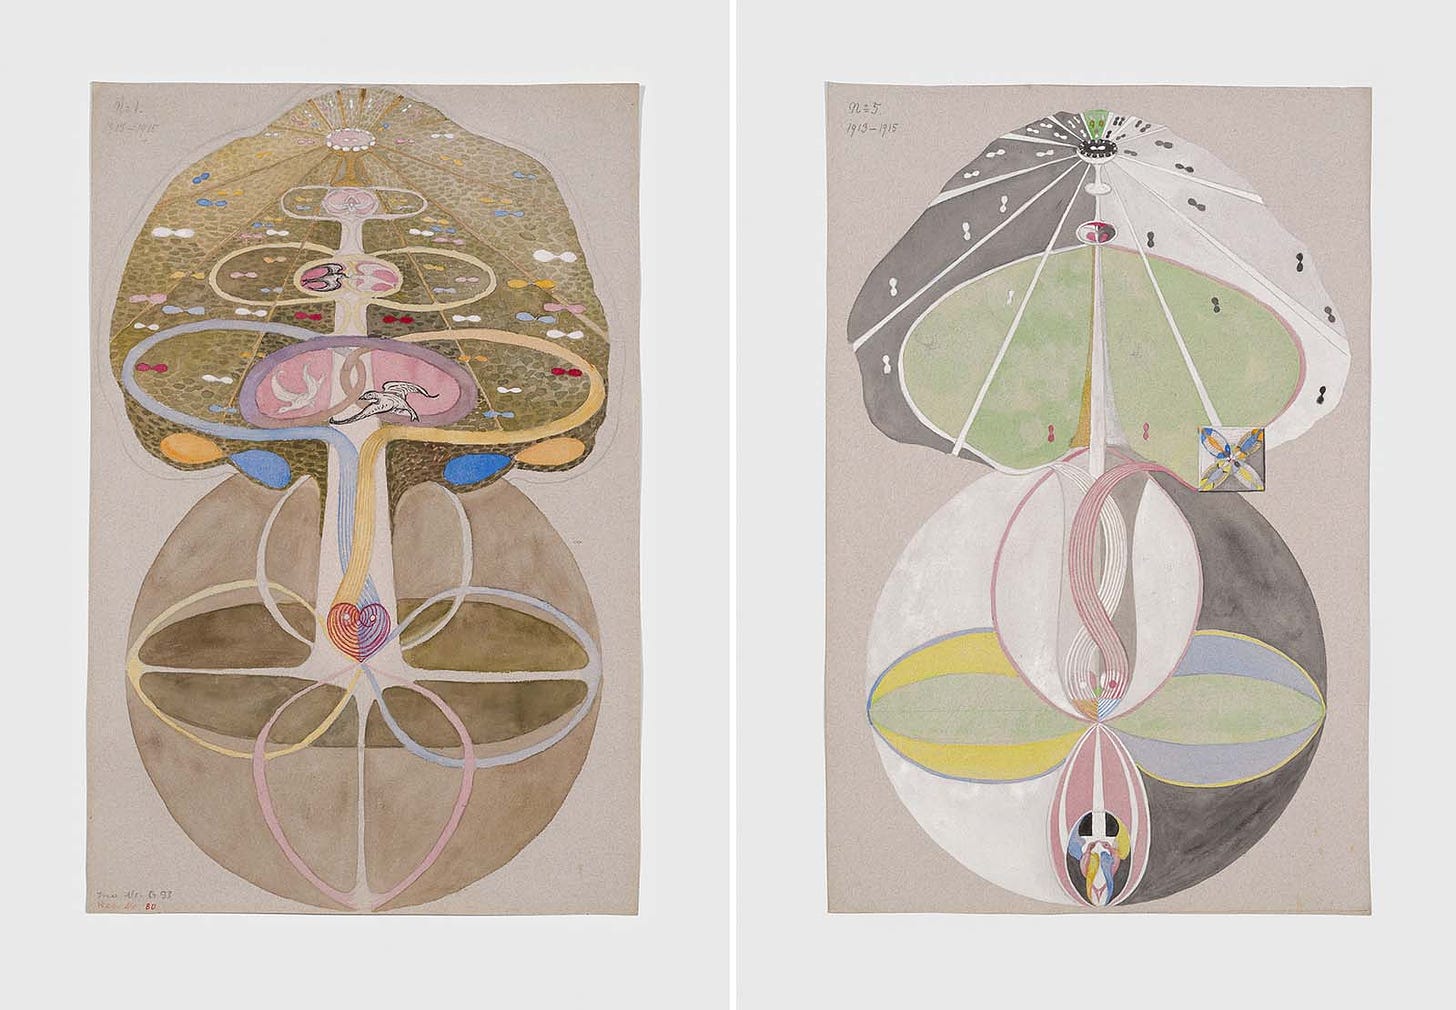 Hilma af Klint: Pioneer of Abstract Art | A WOMEN'S THING